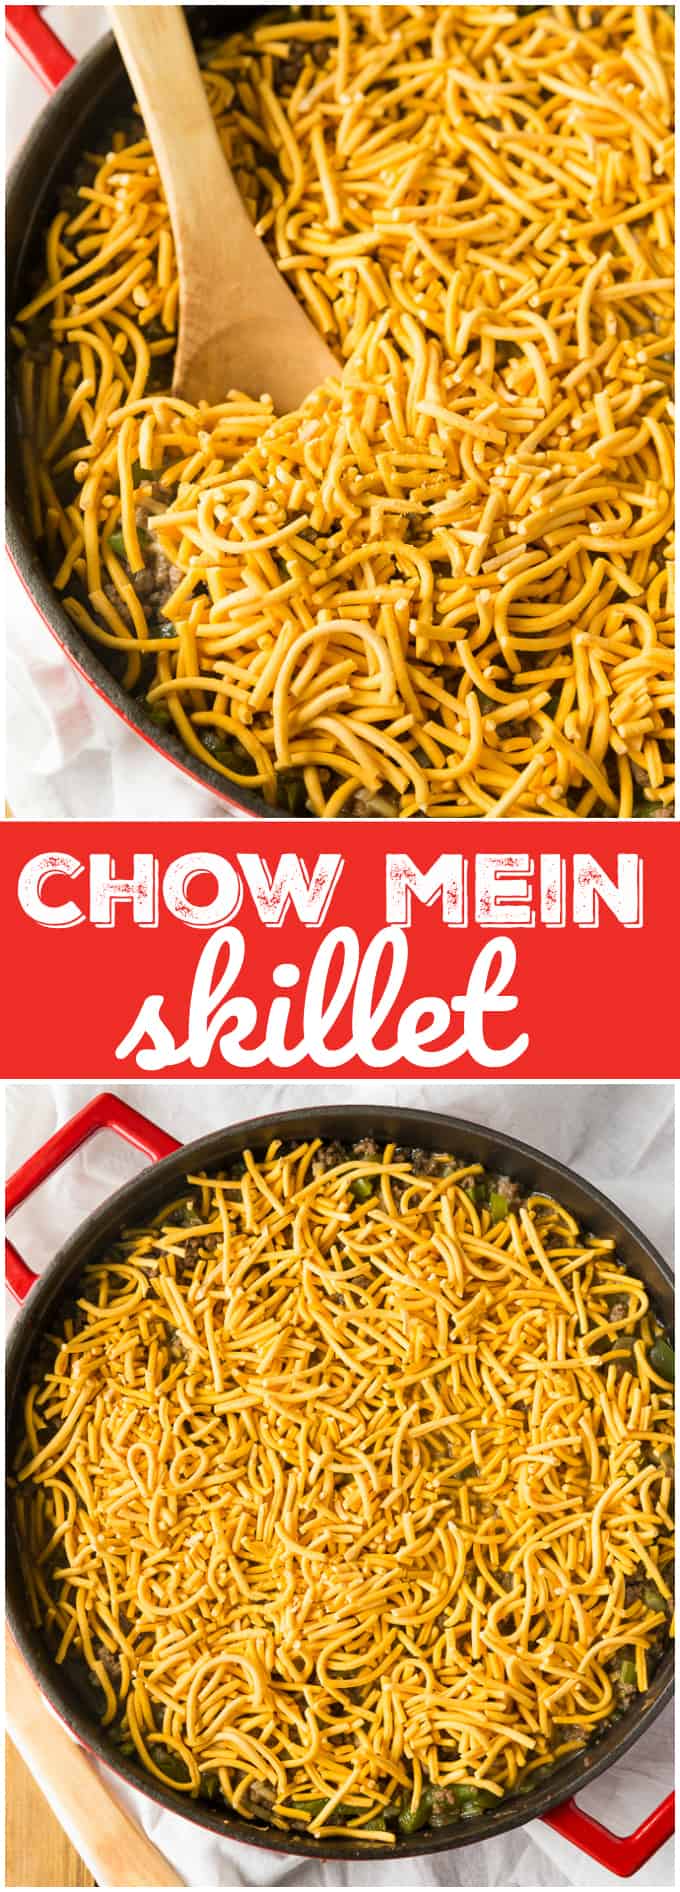 Chow Mein Skillet - A one-pot meal topped with a delightful crunch! This beef and peppers main dish is covered with traditional Chinese noodles for a new and exciting weeknight dinner.